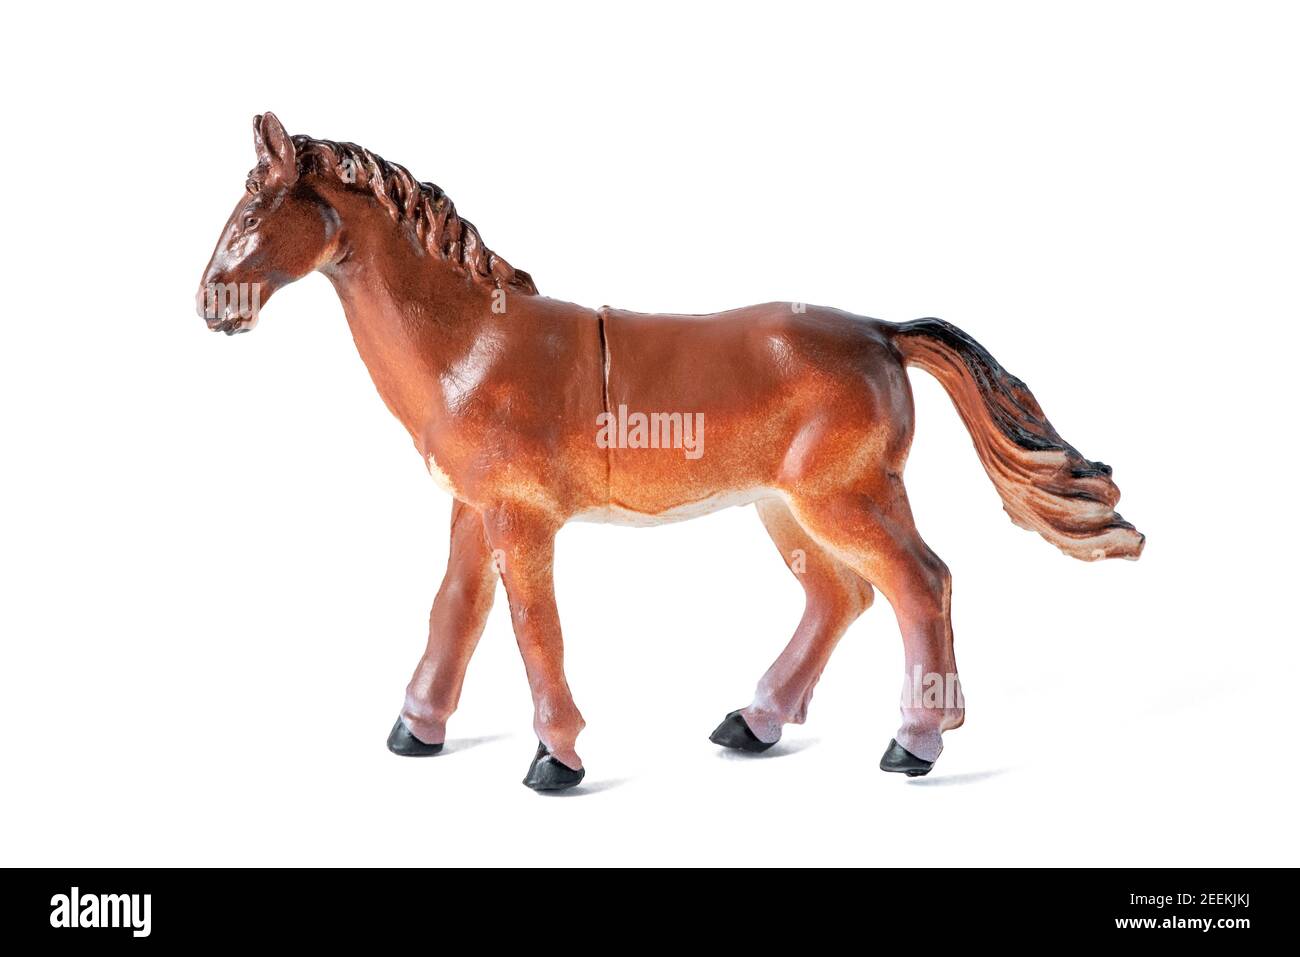 Farm animal. Beautiful toy rubber brown horse isolated on white background Stock Photo